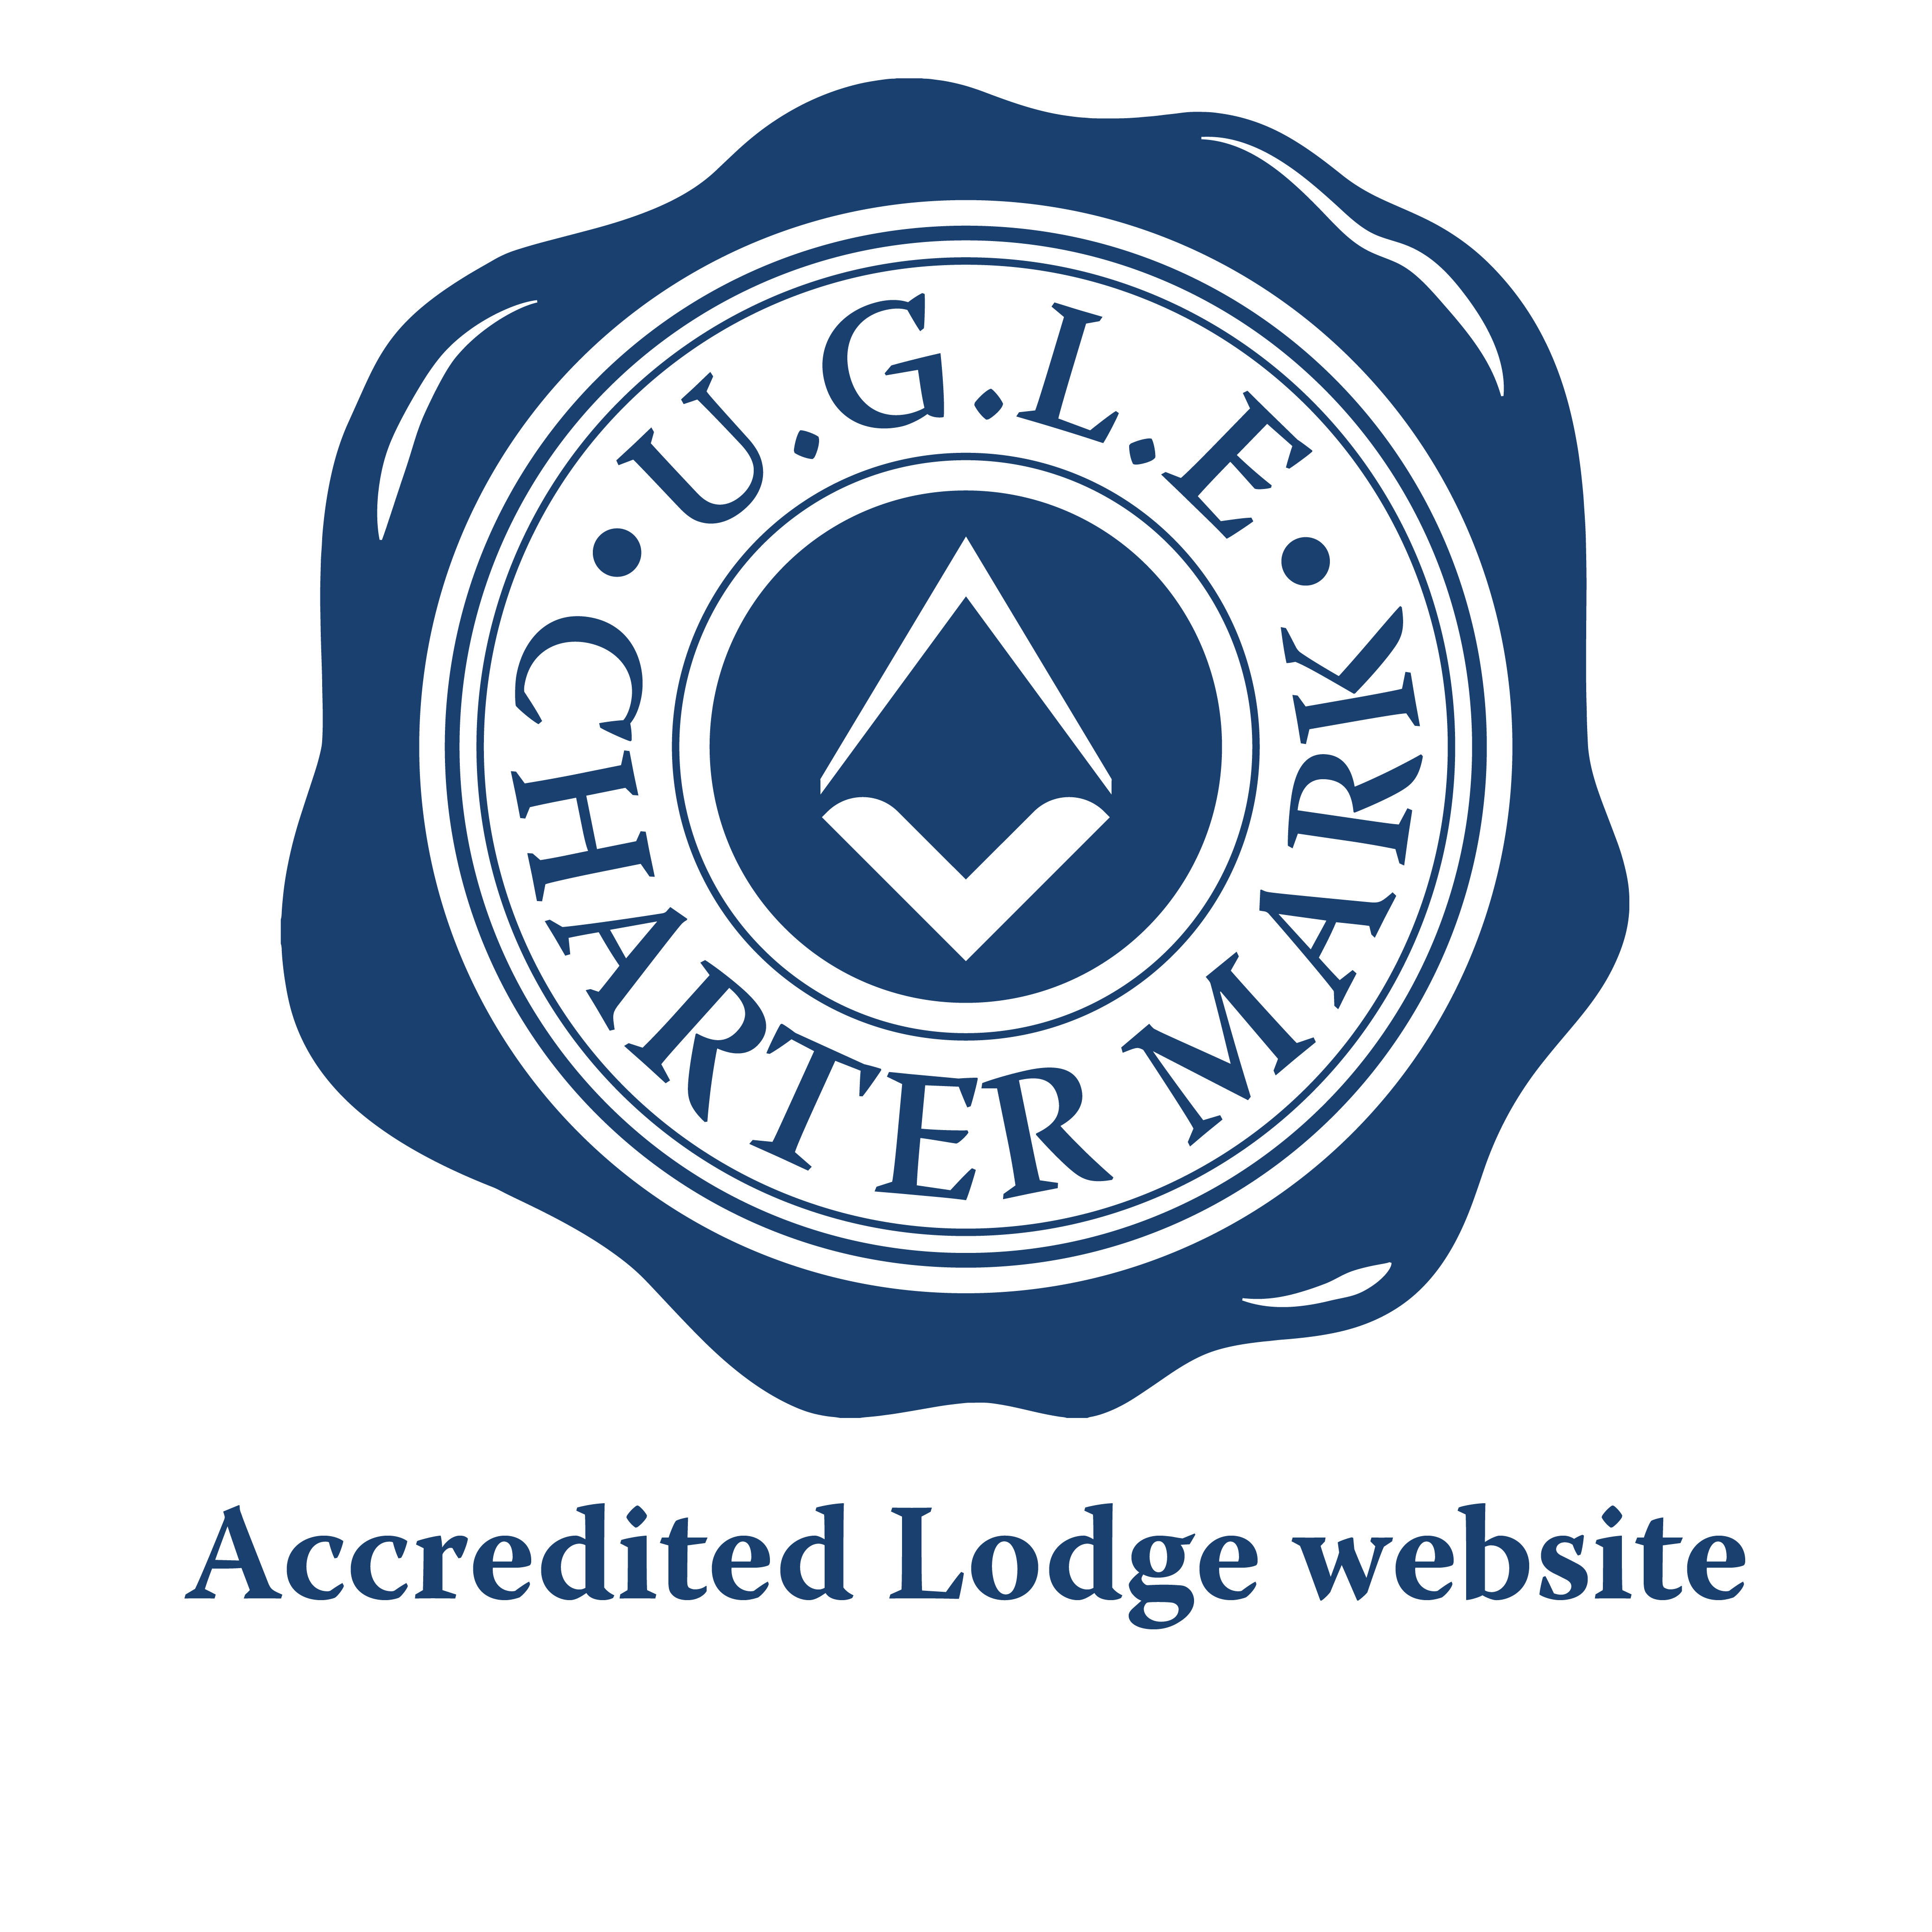 UGLE Charter Mark, this website is Accredited by United Grand Lodge of England